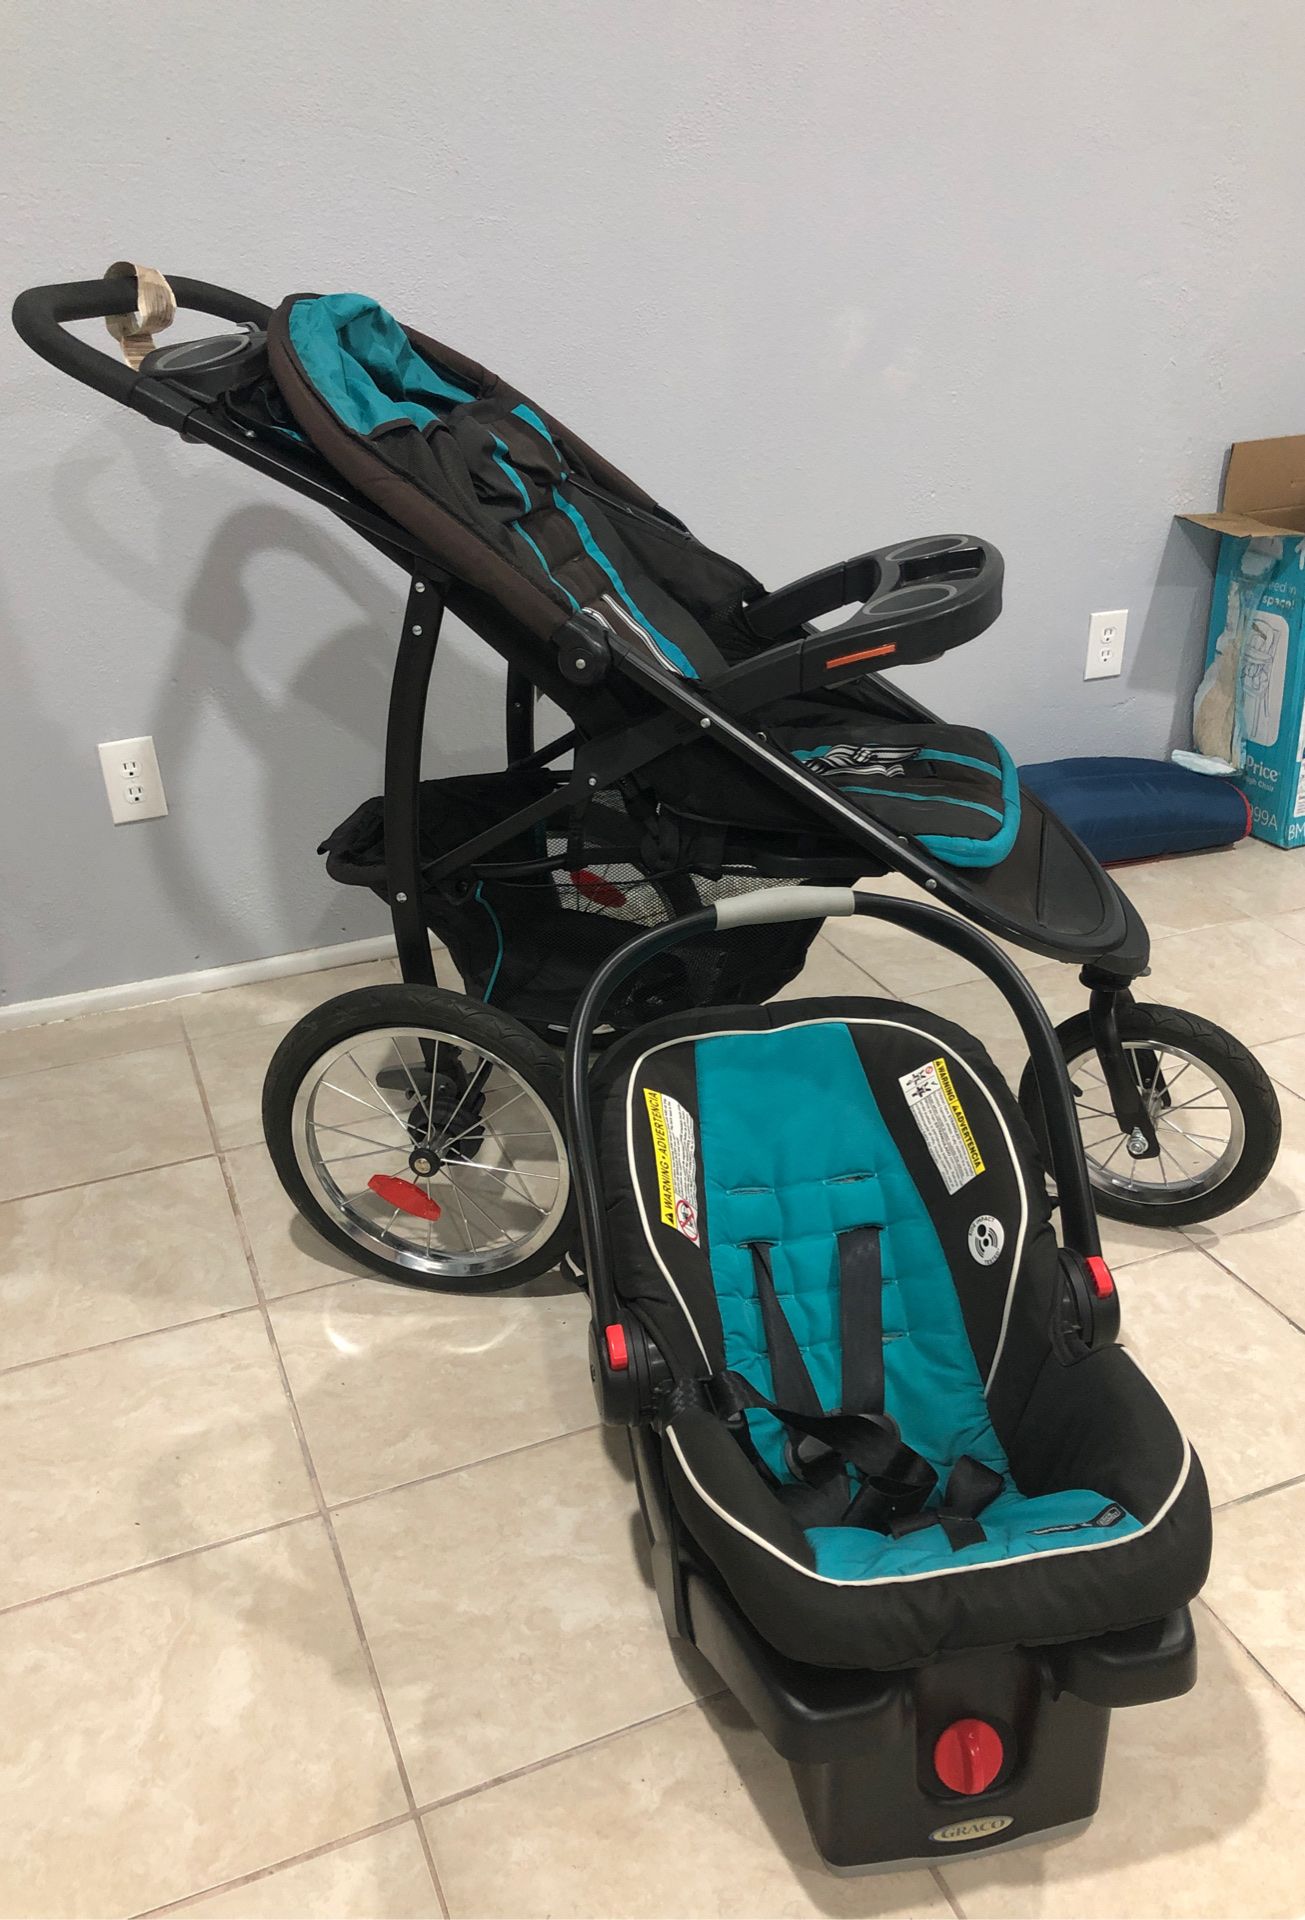 Graco stroller and matching car seat